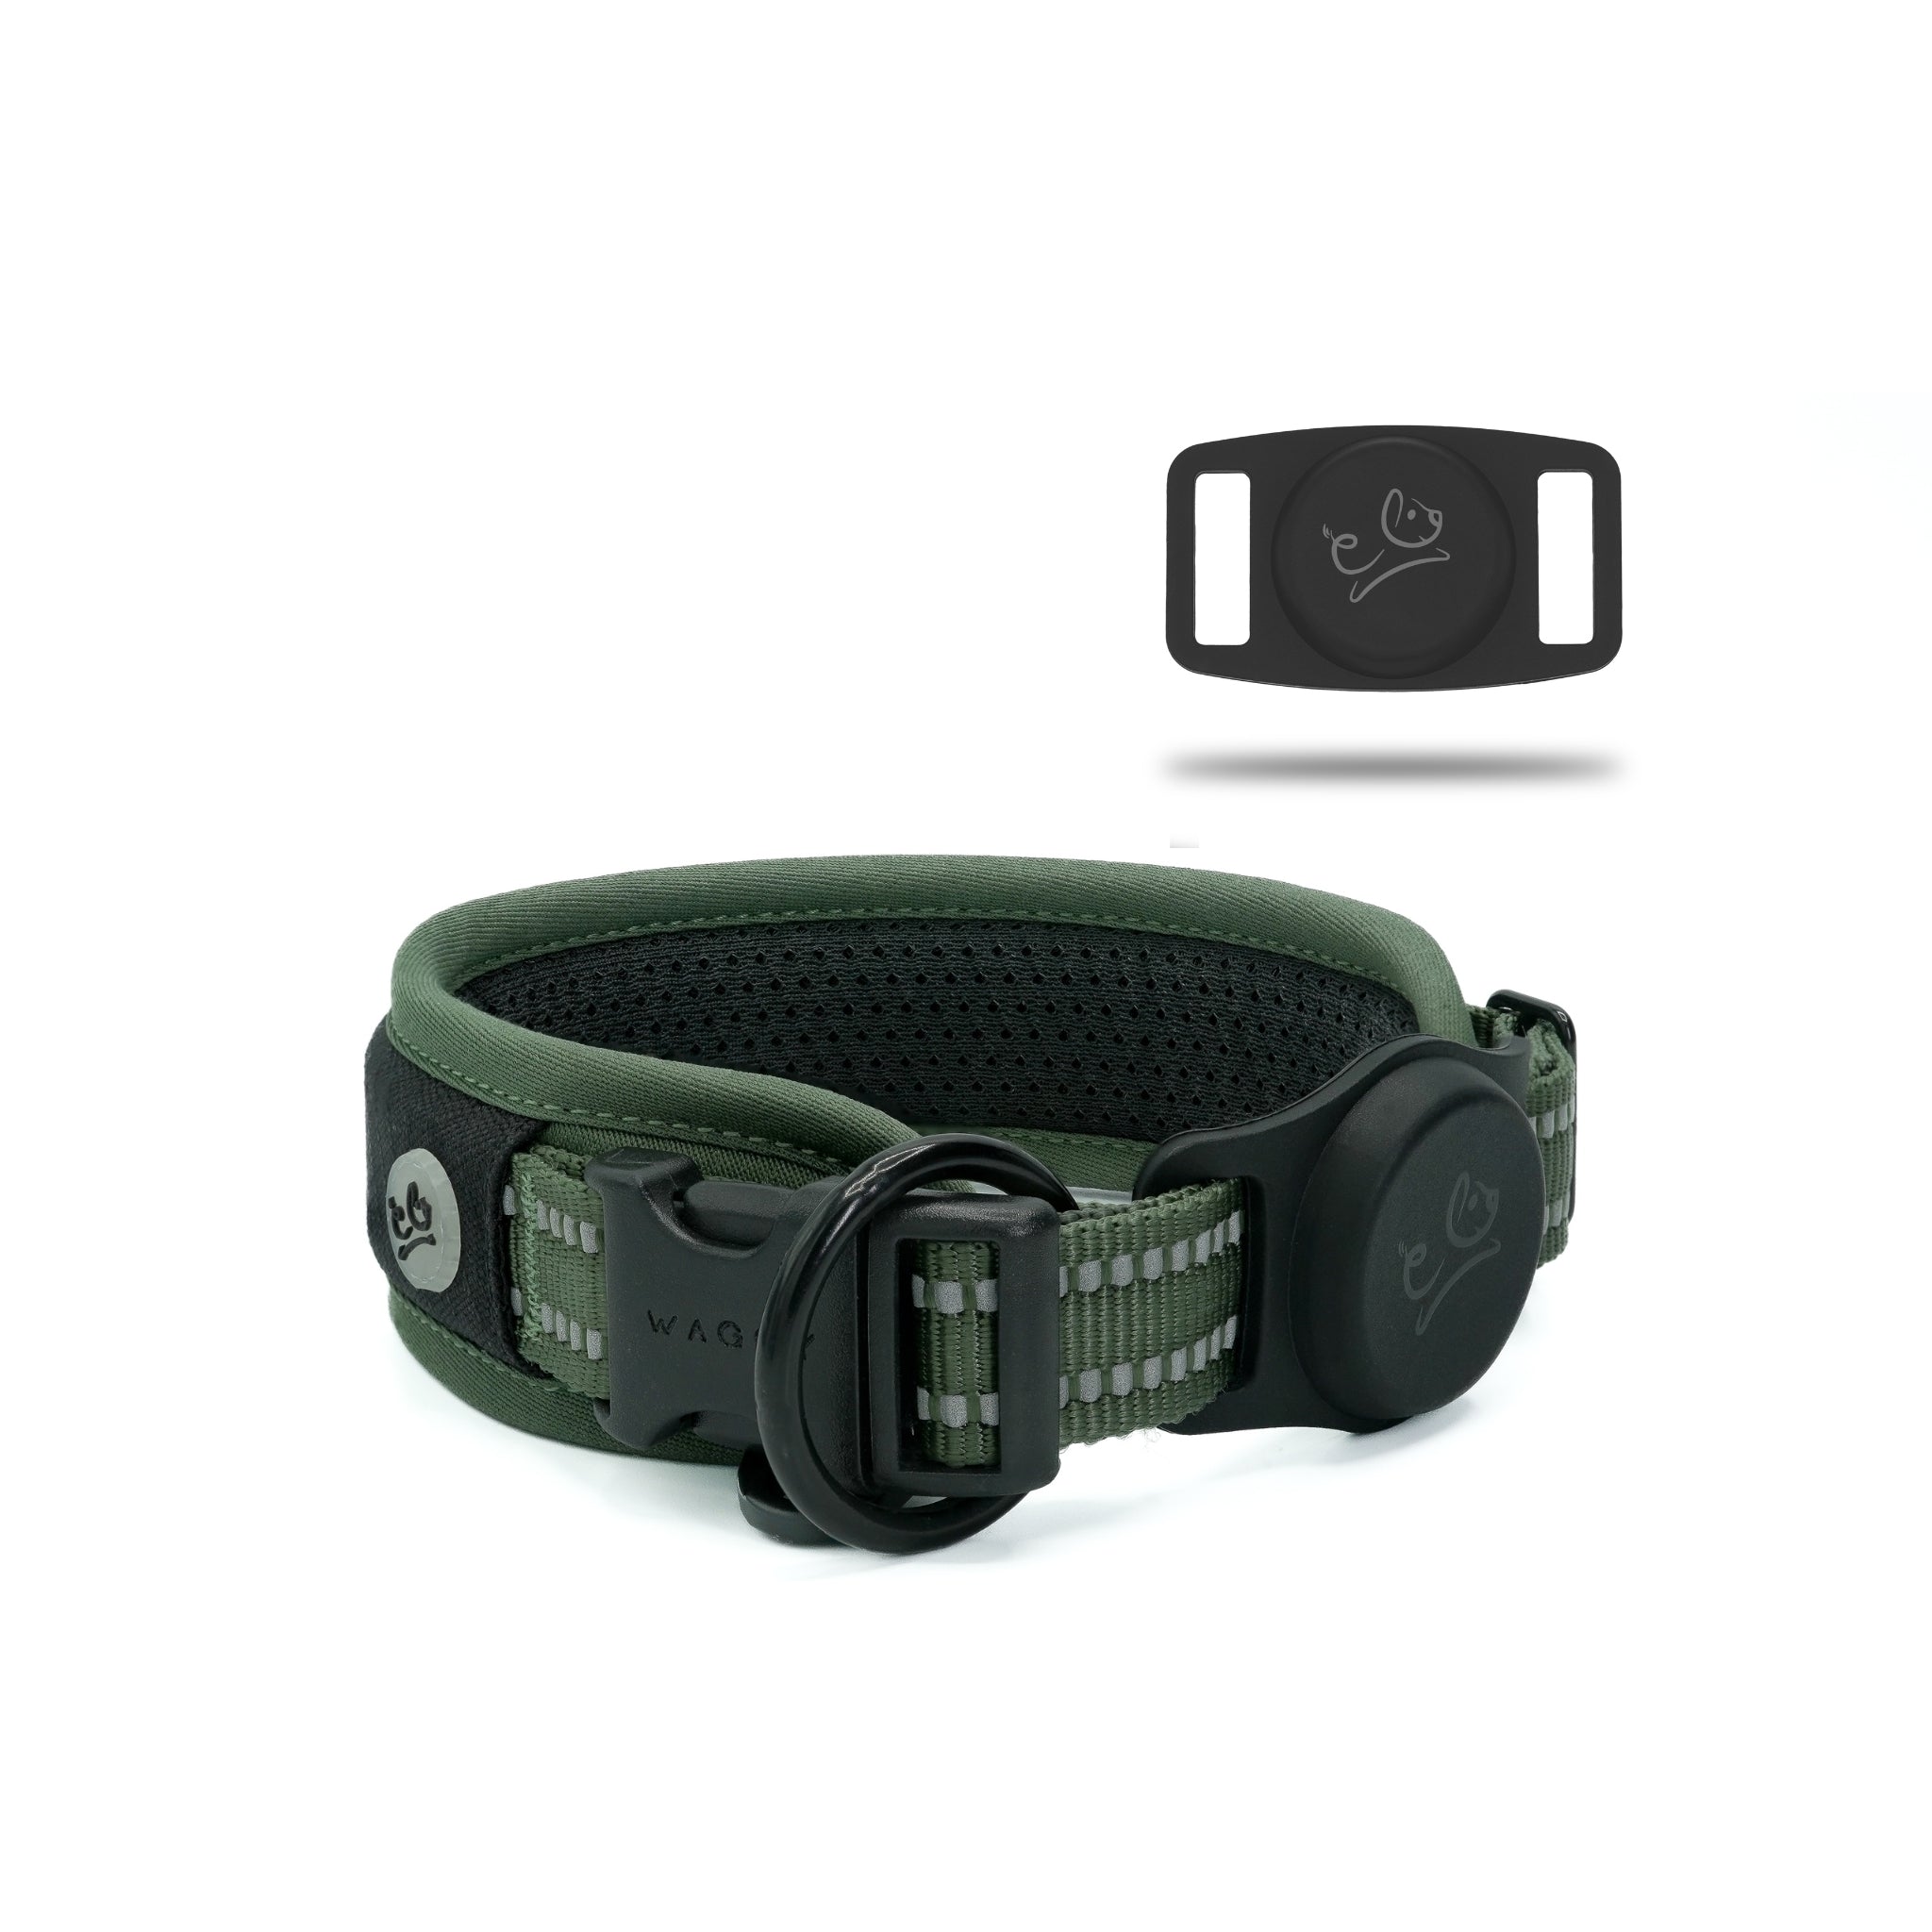 Green Air Mesh dog collar in the center showing details of the 3M reflective stitching & airtag holder attached to the collar. Airtag holder on the right corner with Waggy logo.